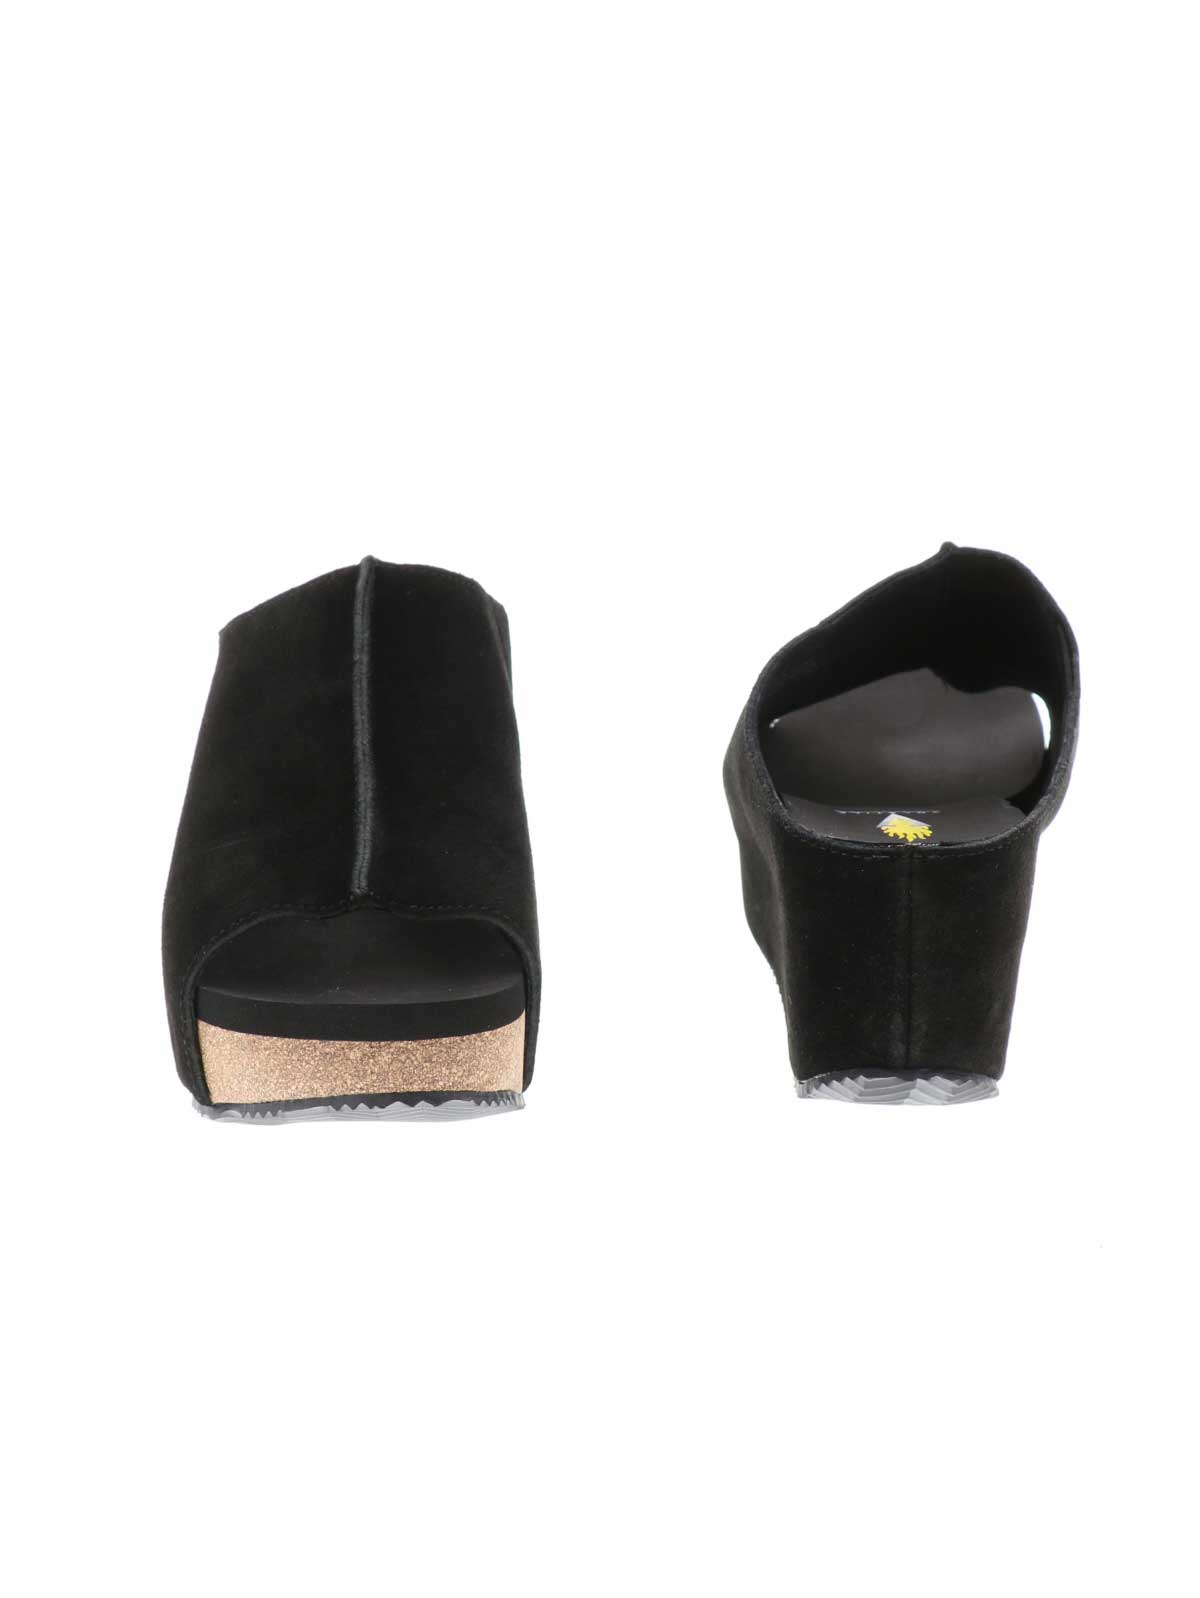 SLIP ON PEEP TOE WEDGE - Suede, hair calf, metallic tonal camo, faux snake upper with butted center seam and inner elastic gore for perfect fit - Slip on design - Leather lining - Signature ultra comfort EVA insole - Rubber traction outsole - Approx. 0.75" platform height - Approx. 2.75" wedge heel height black3